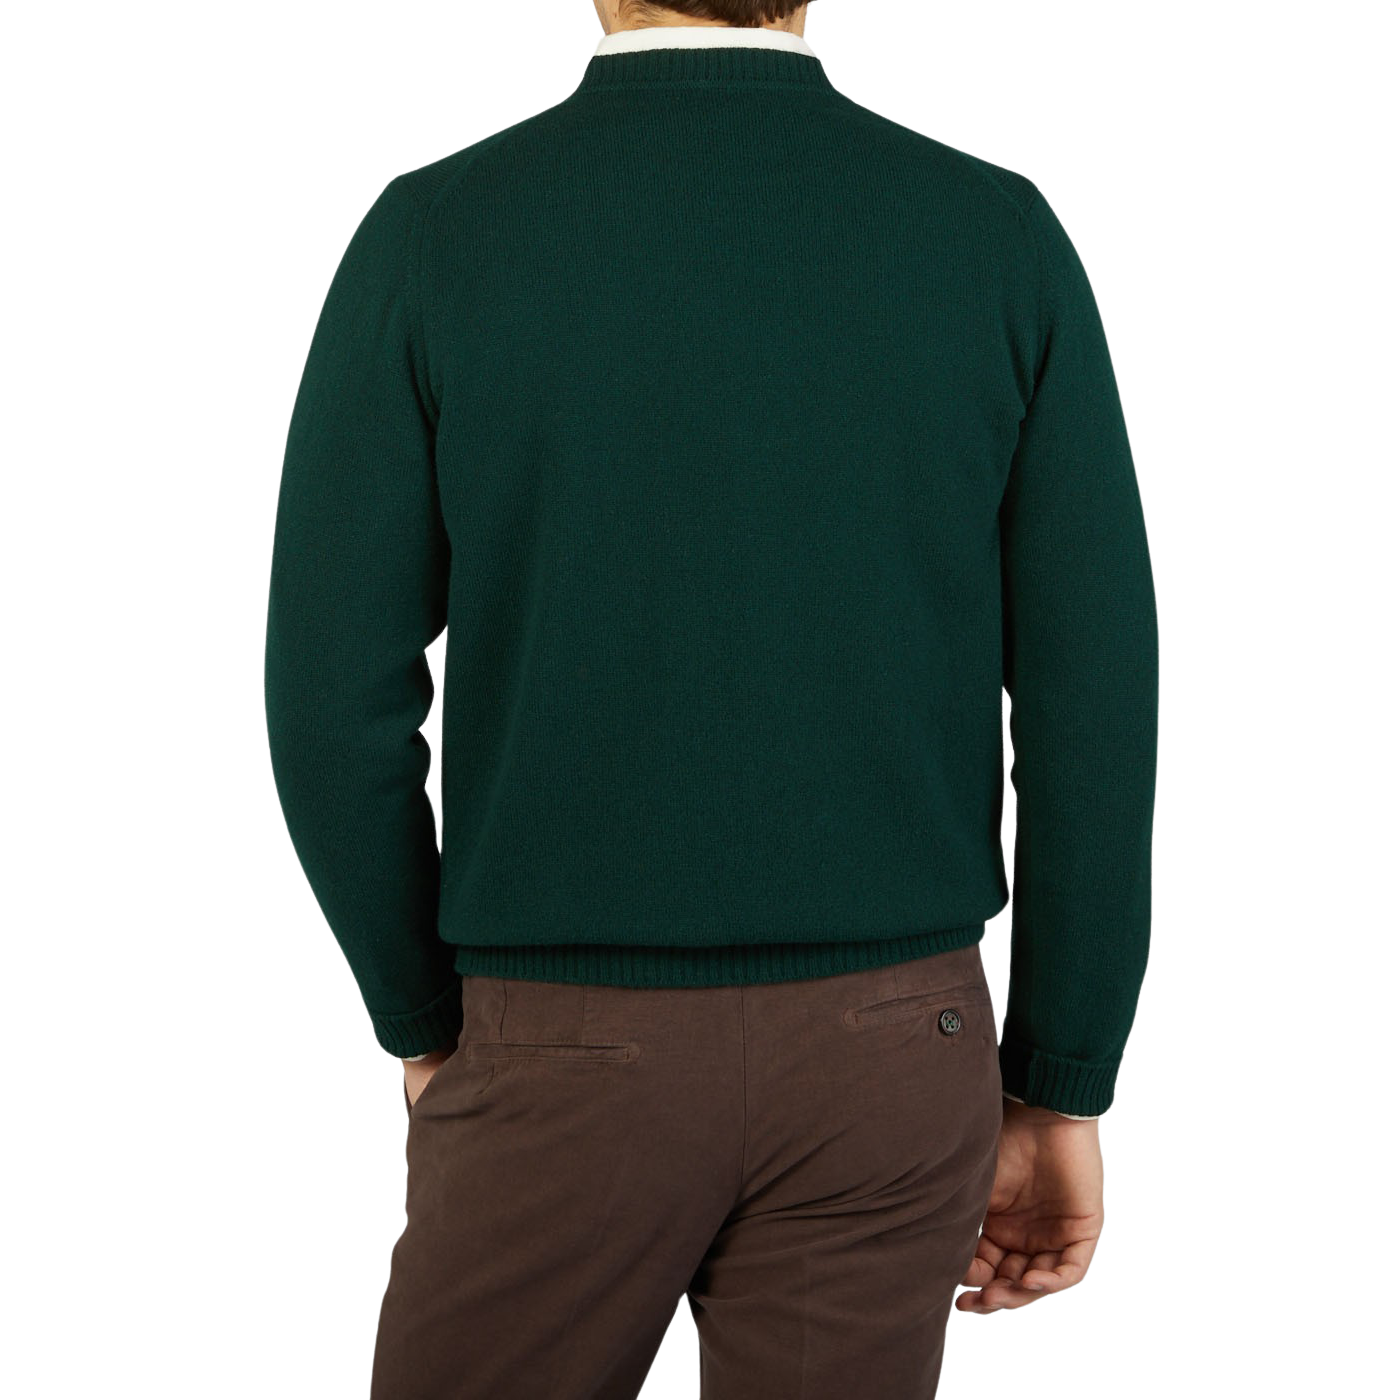 The back view of a man wearing a Tartan Green Crew Neck Lambswool Sweater by William Lockie and brown pants.